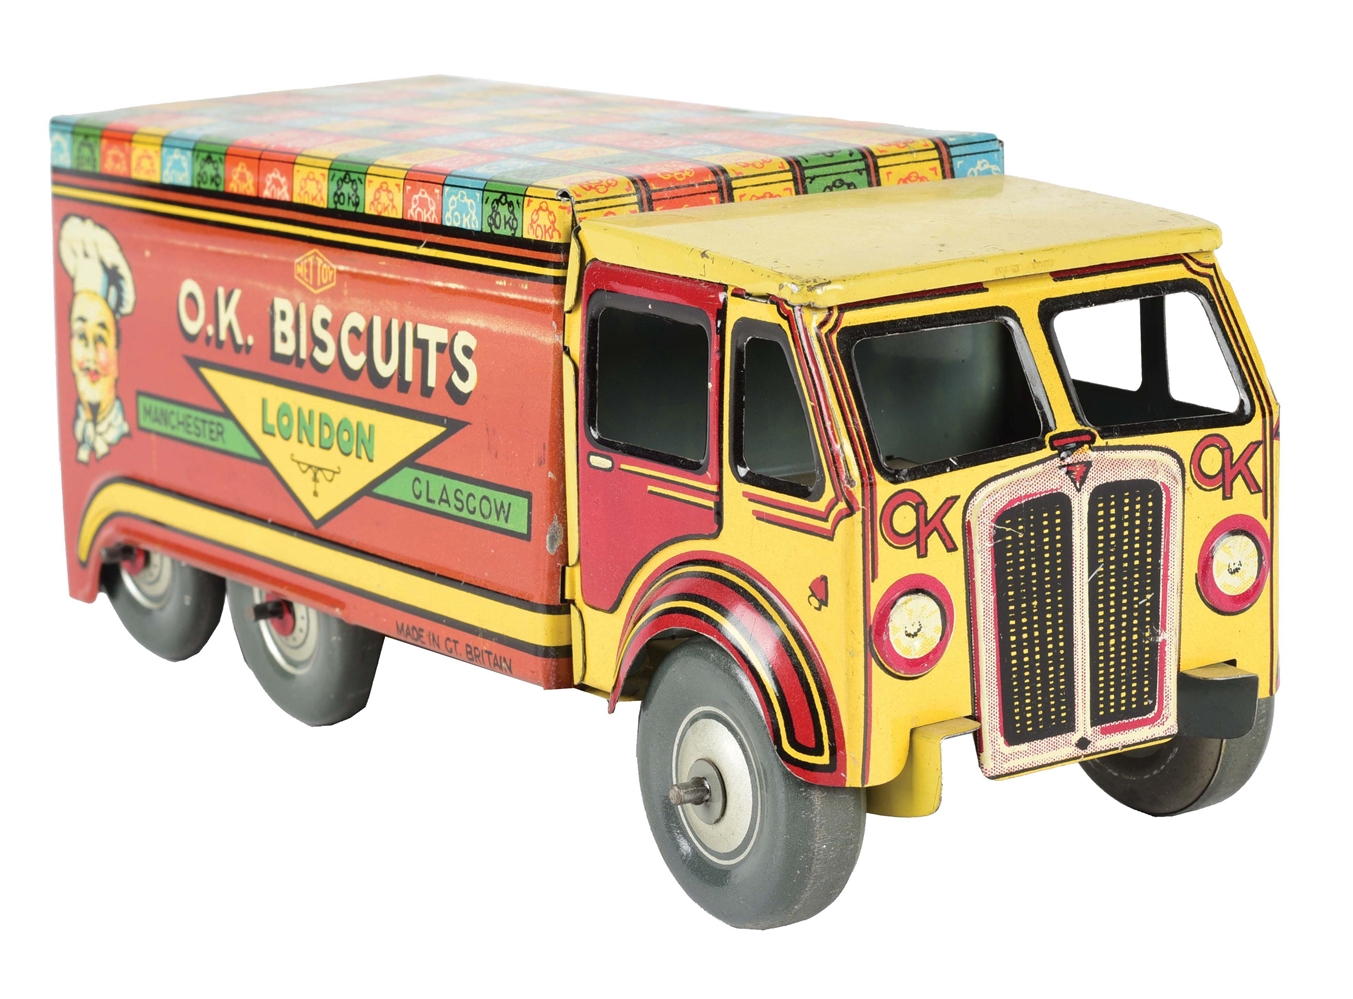 OK BISCUITS DELIVERY TRUCK TIN.